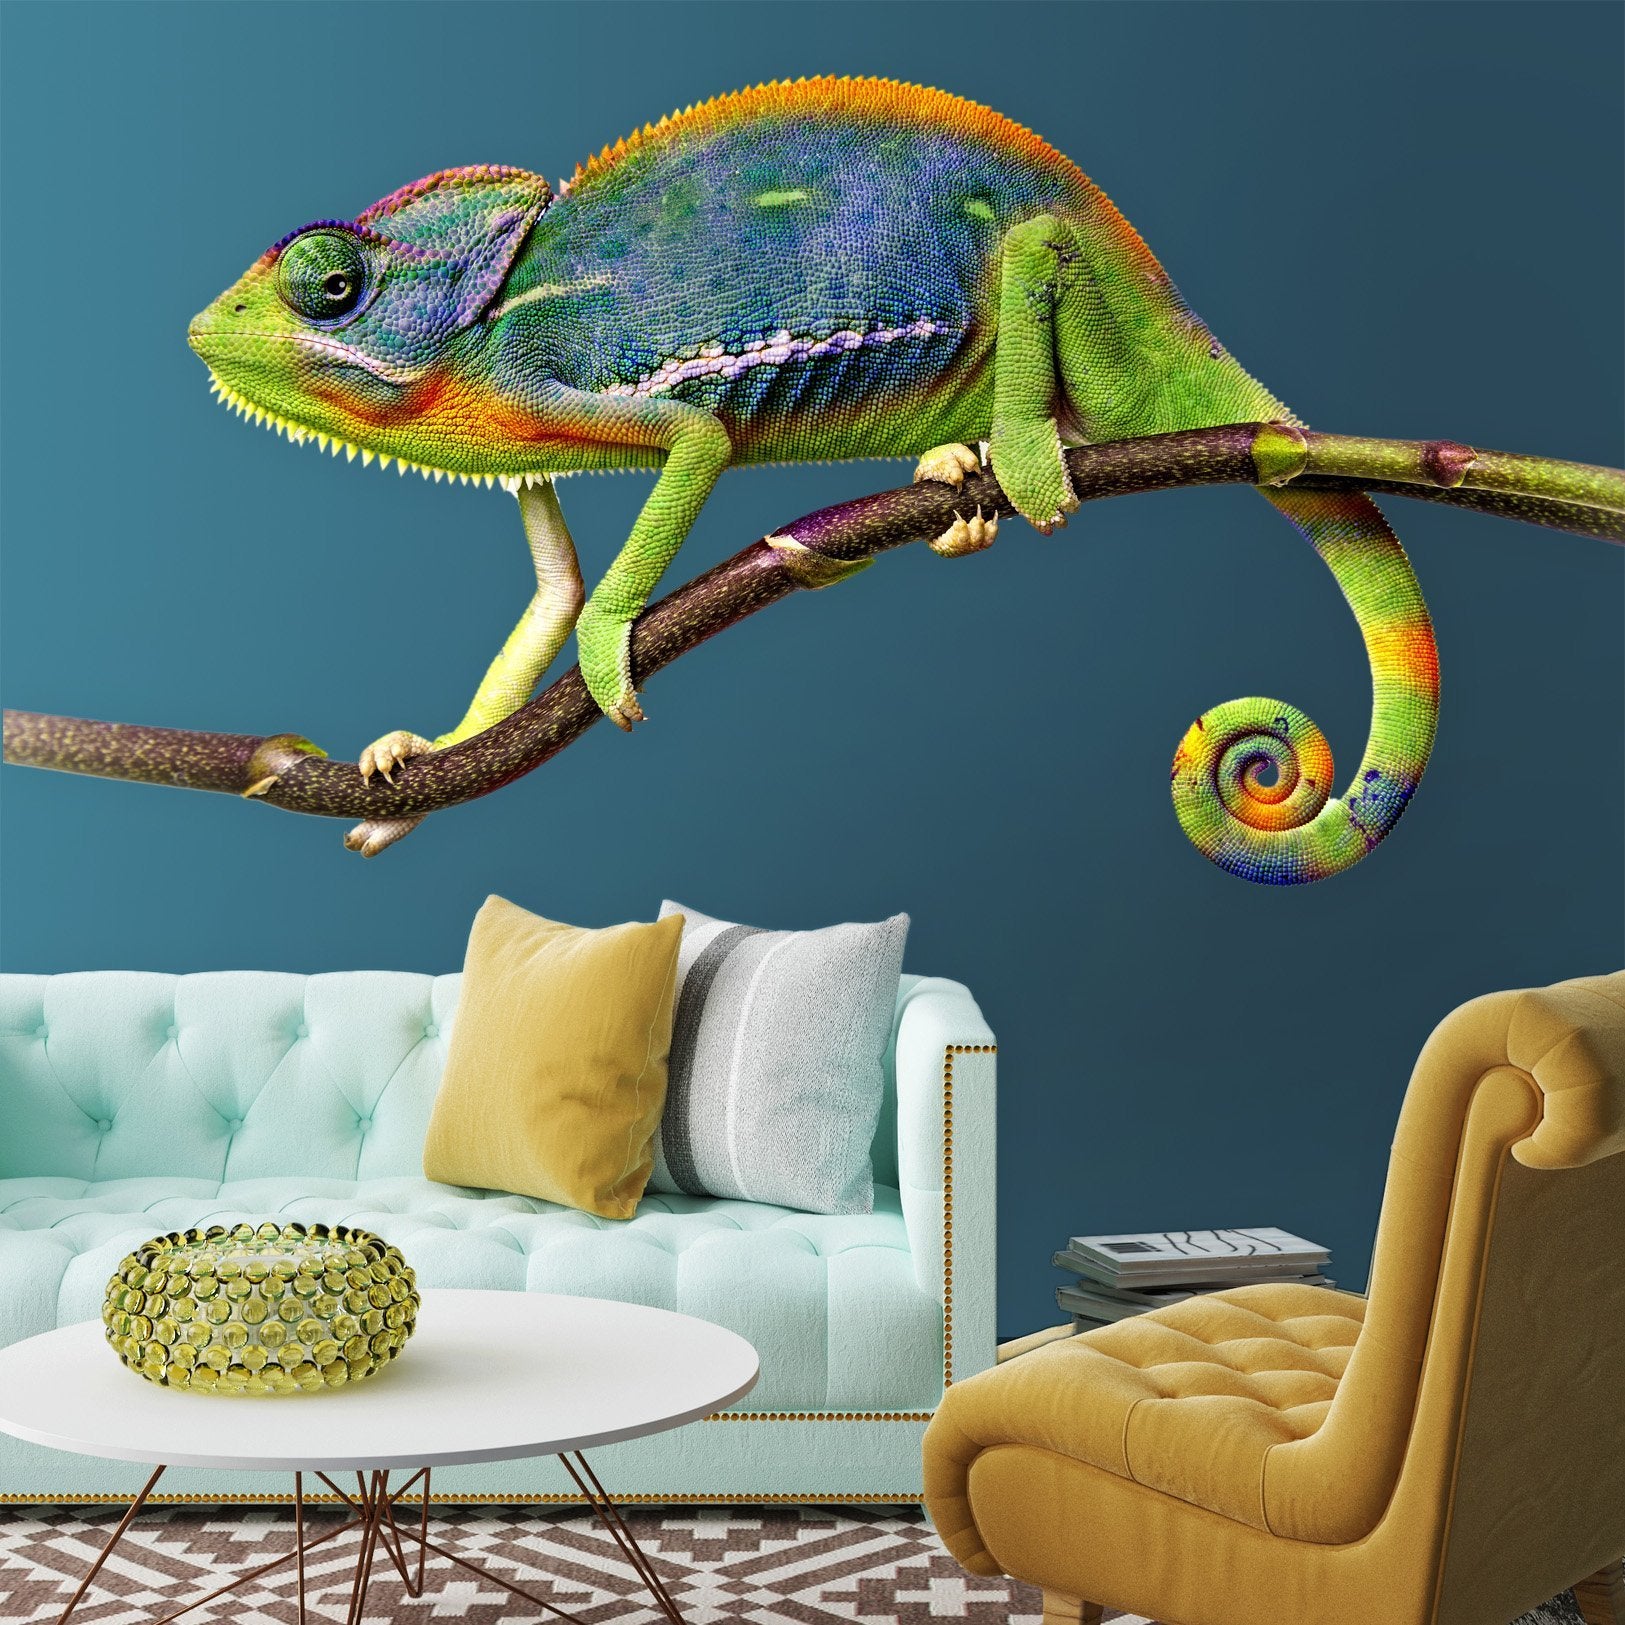 3D Chameleon With Eyes Closed 101 Animals Wall Stickers Wallpaper AJ Wallpaper 